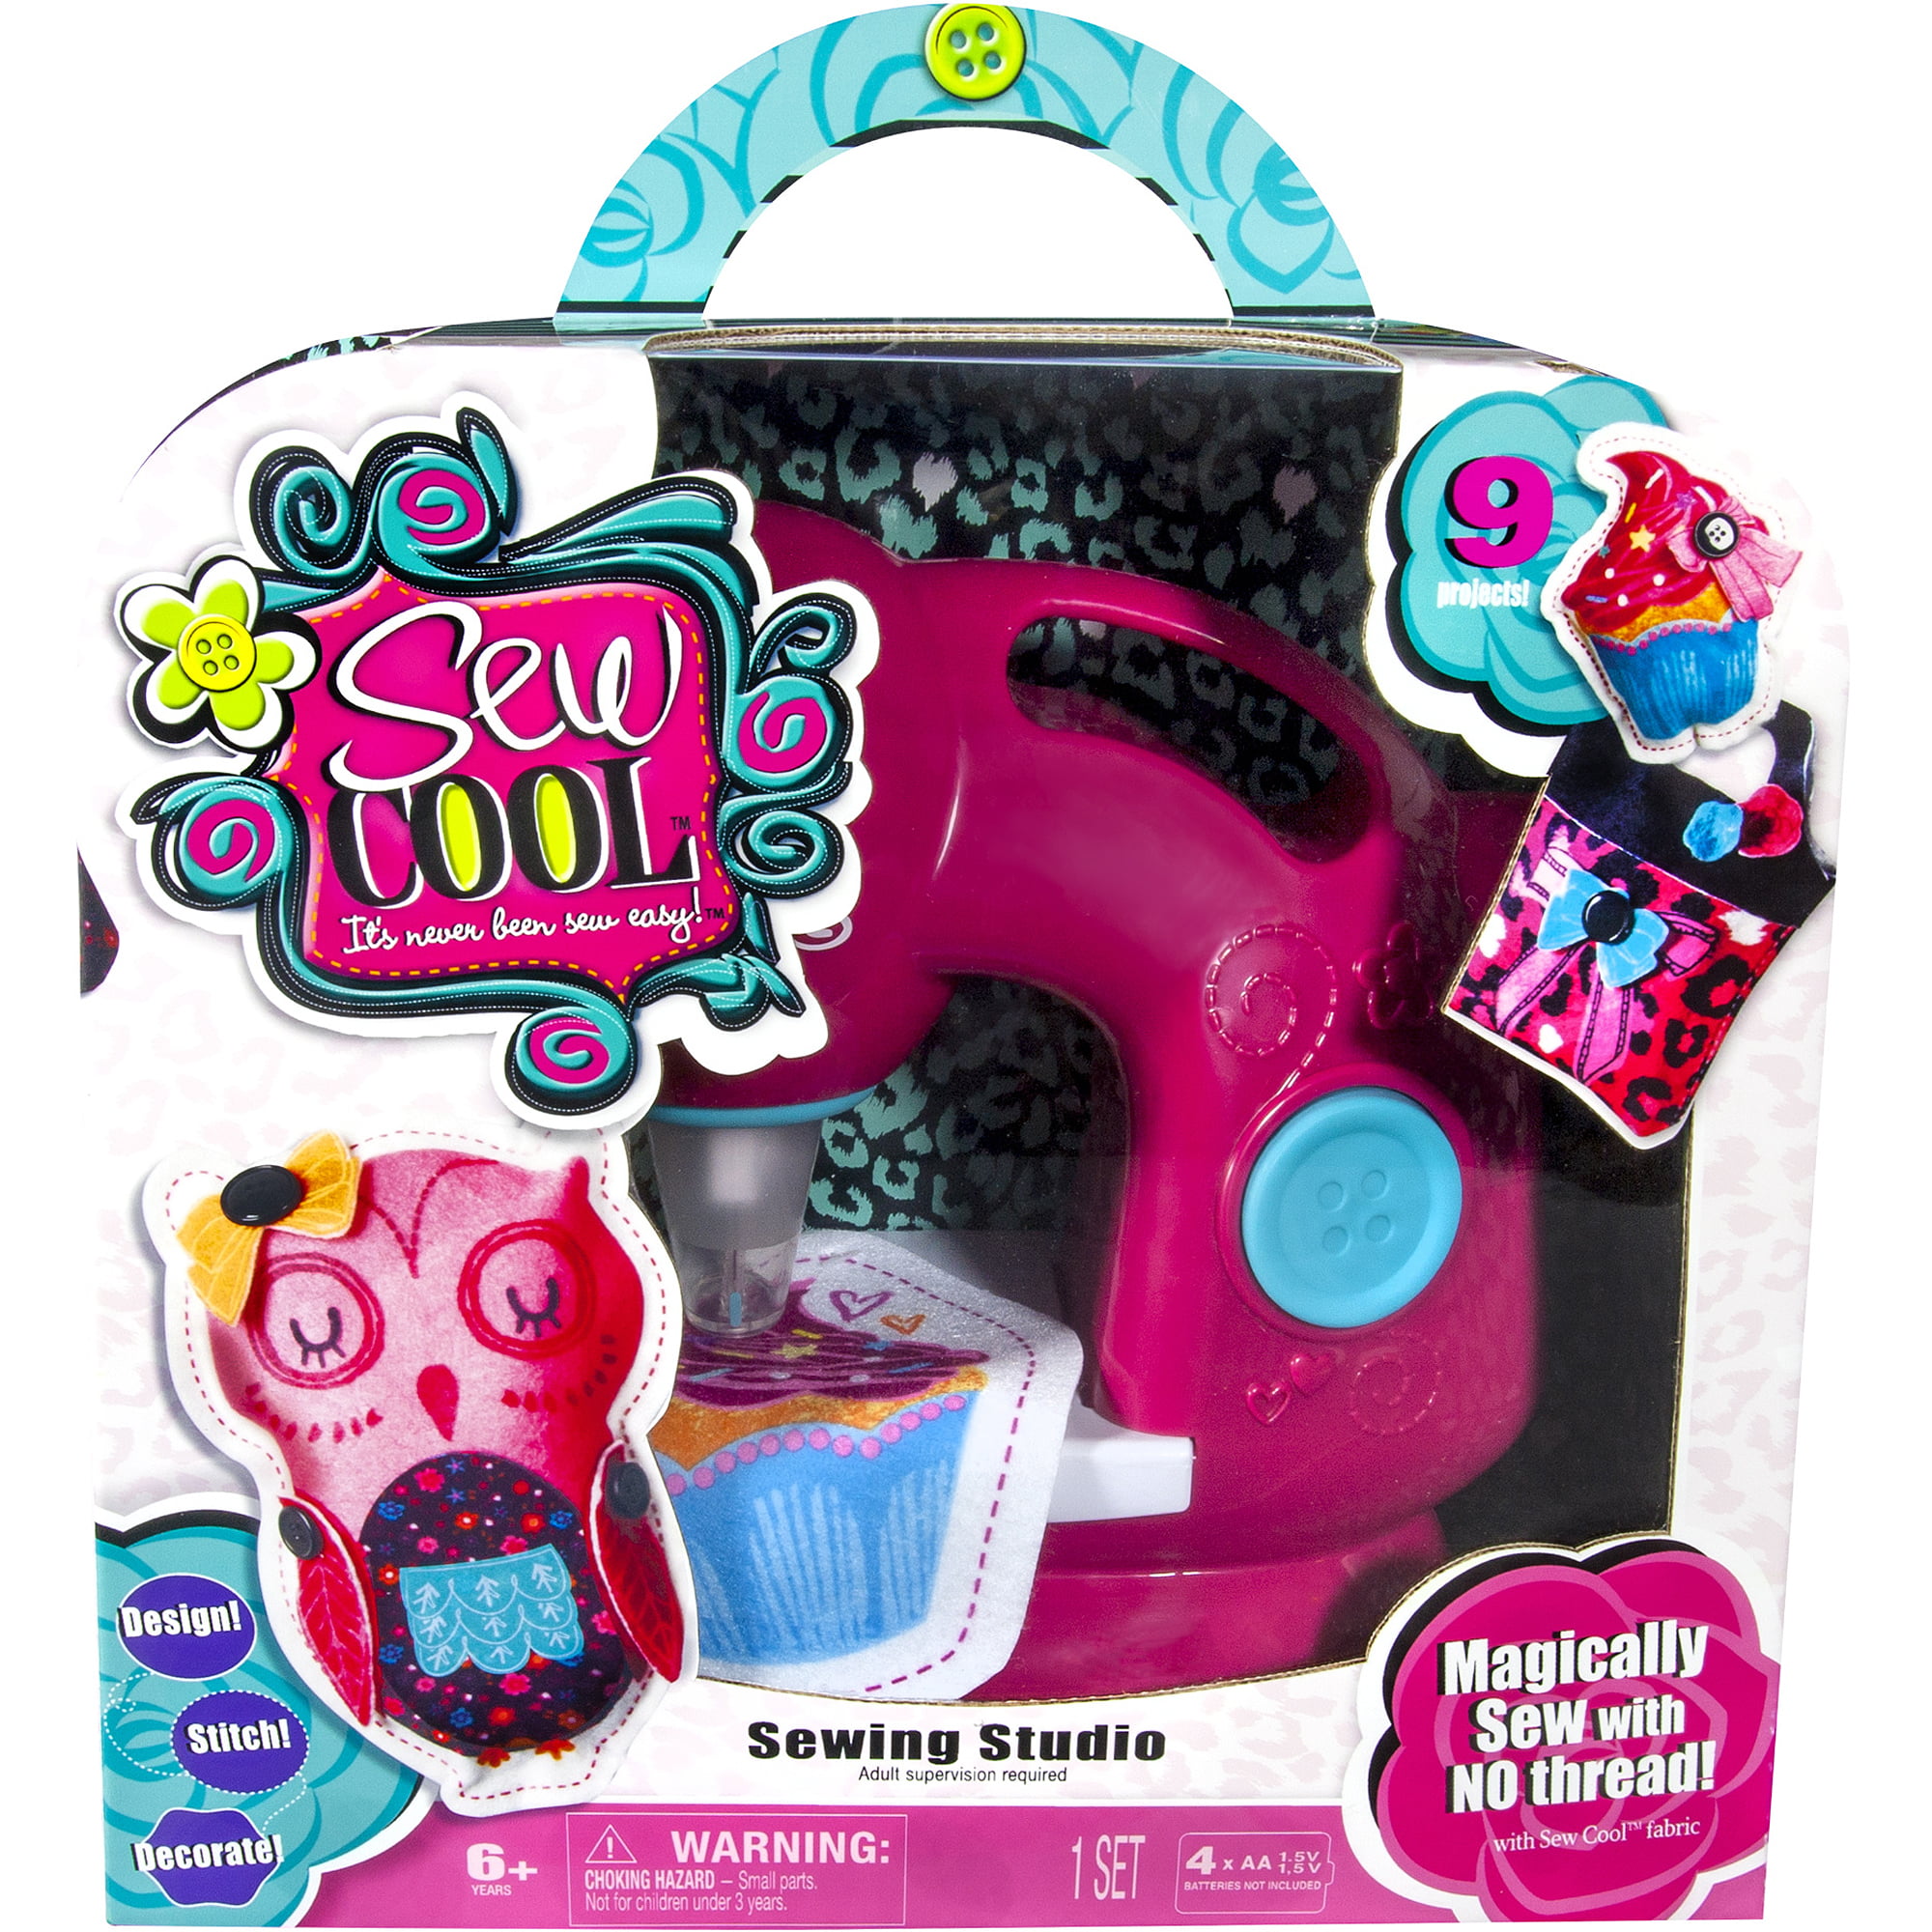 walmart toys for girls age 10